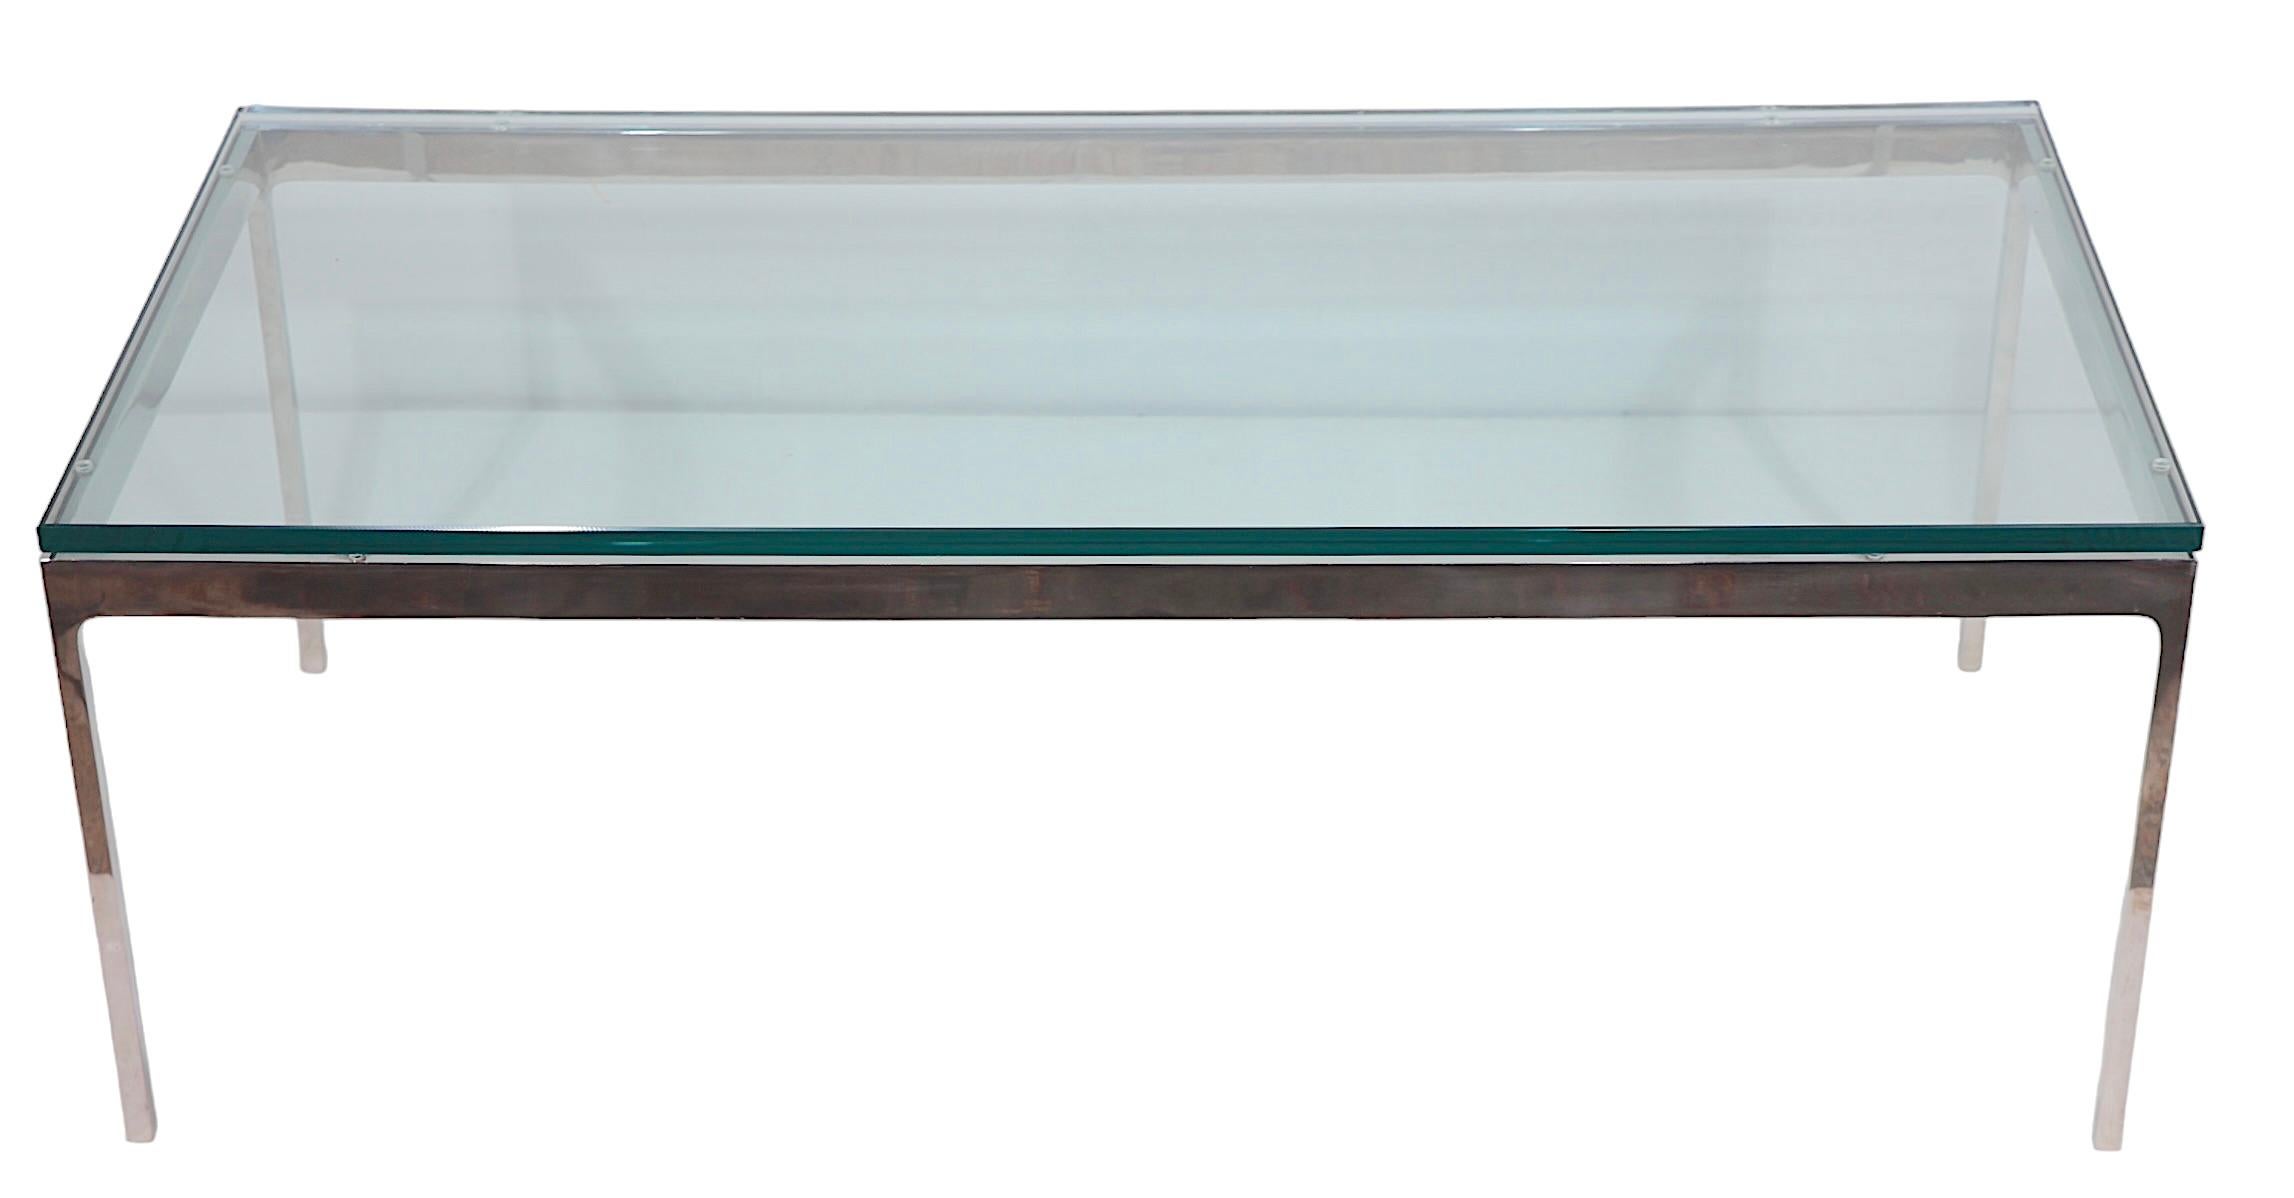 International Style Chrome and Glass Coffee Table by Zographos c 1970's  For Sale 3